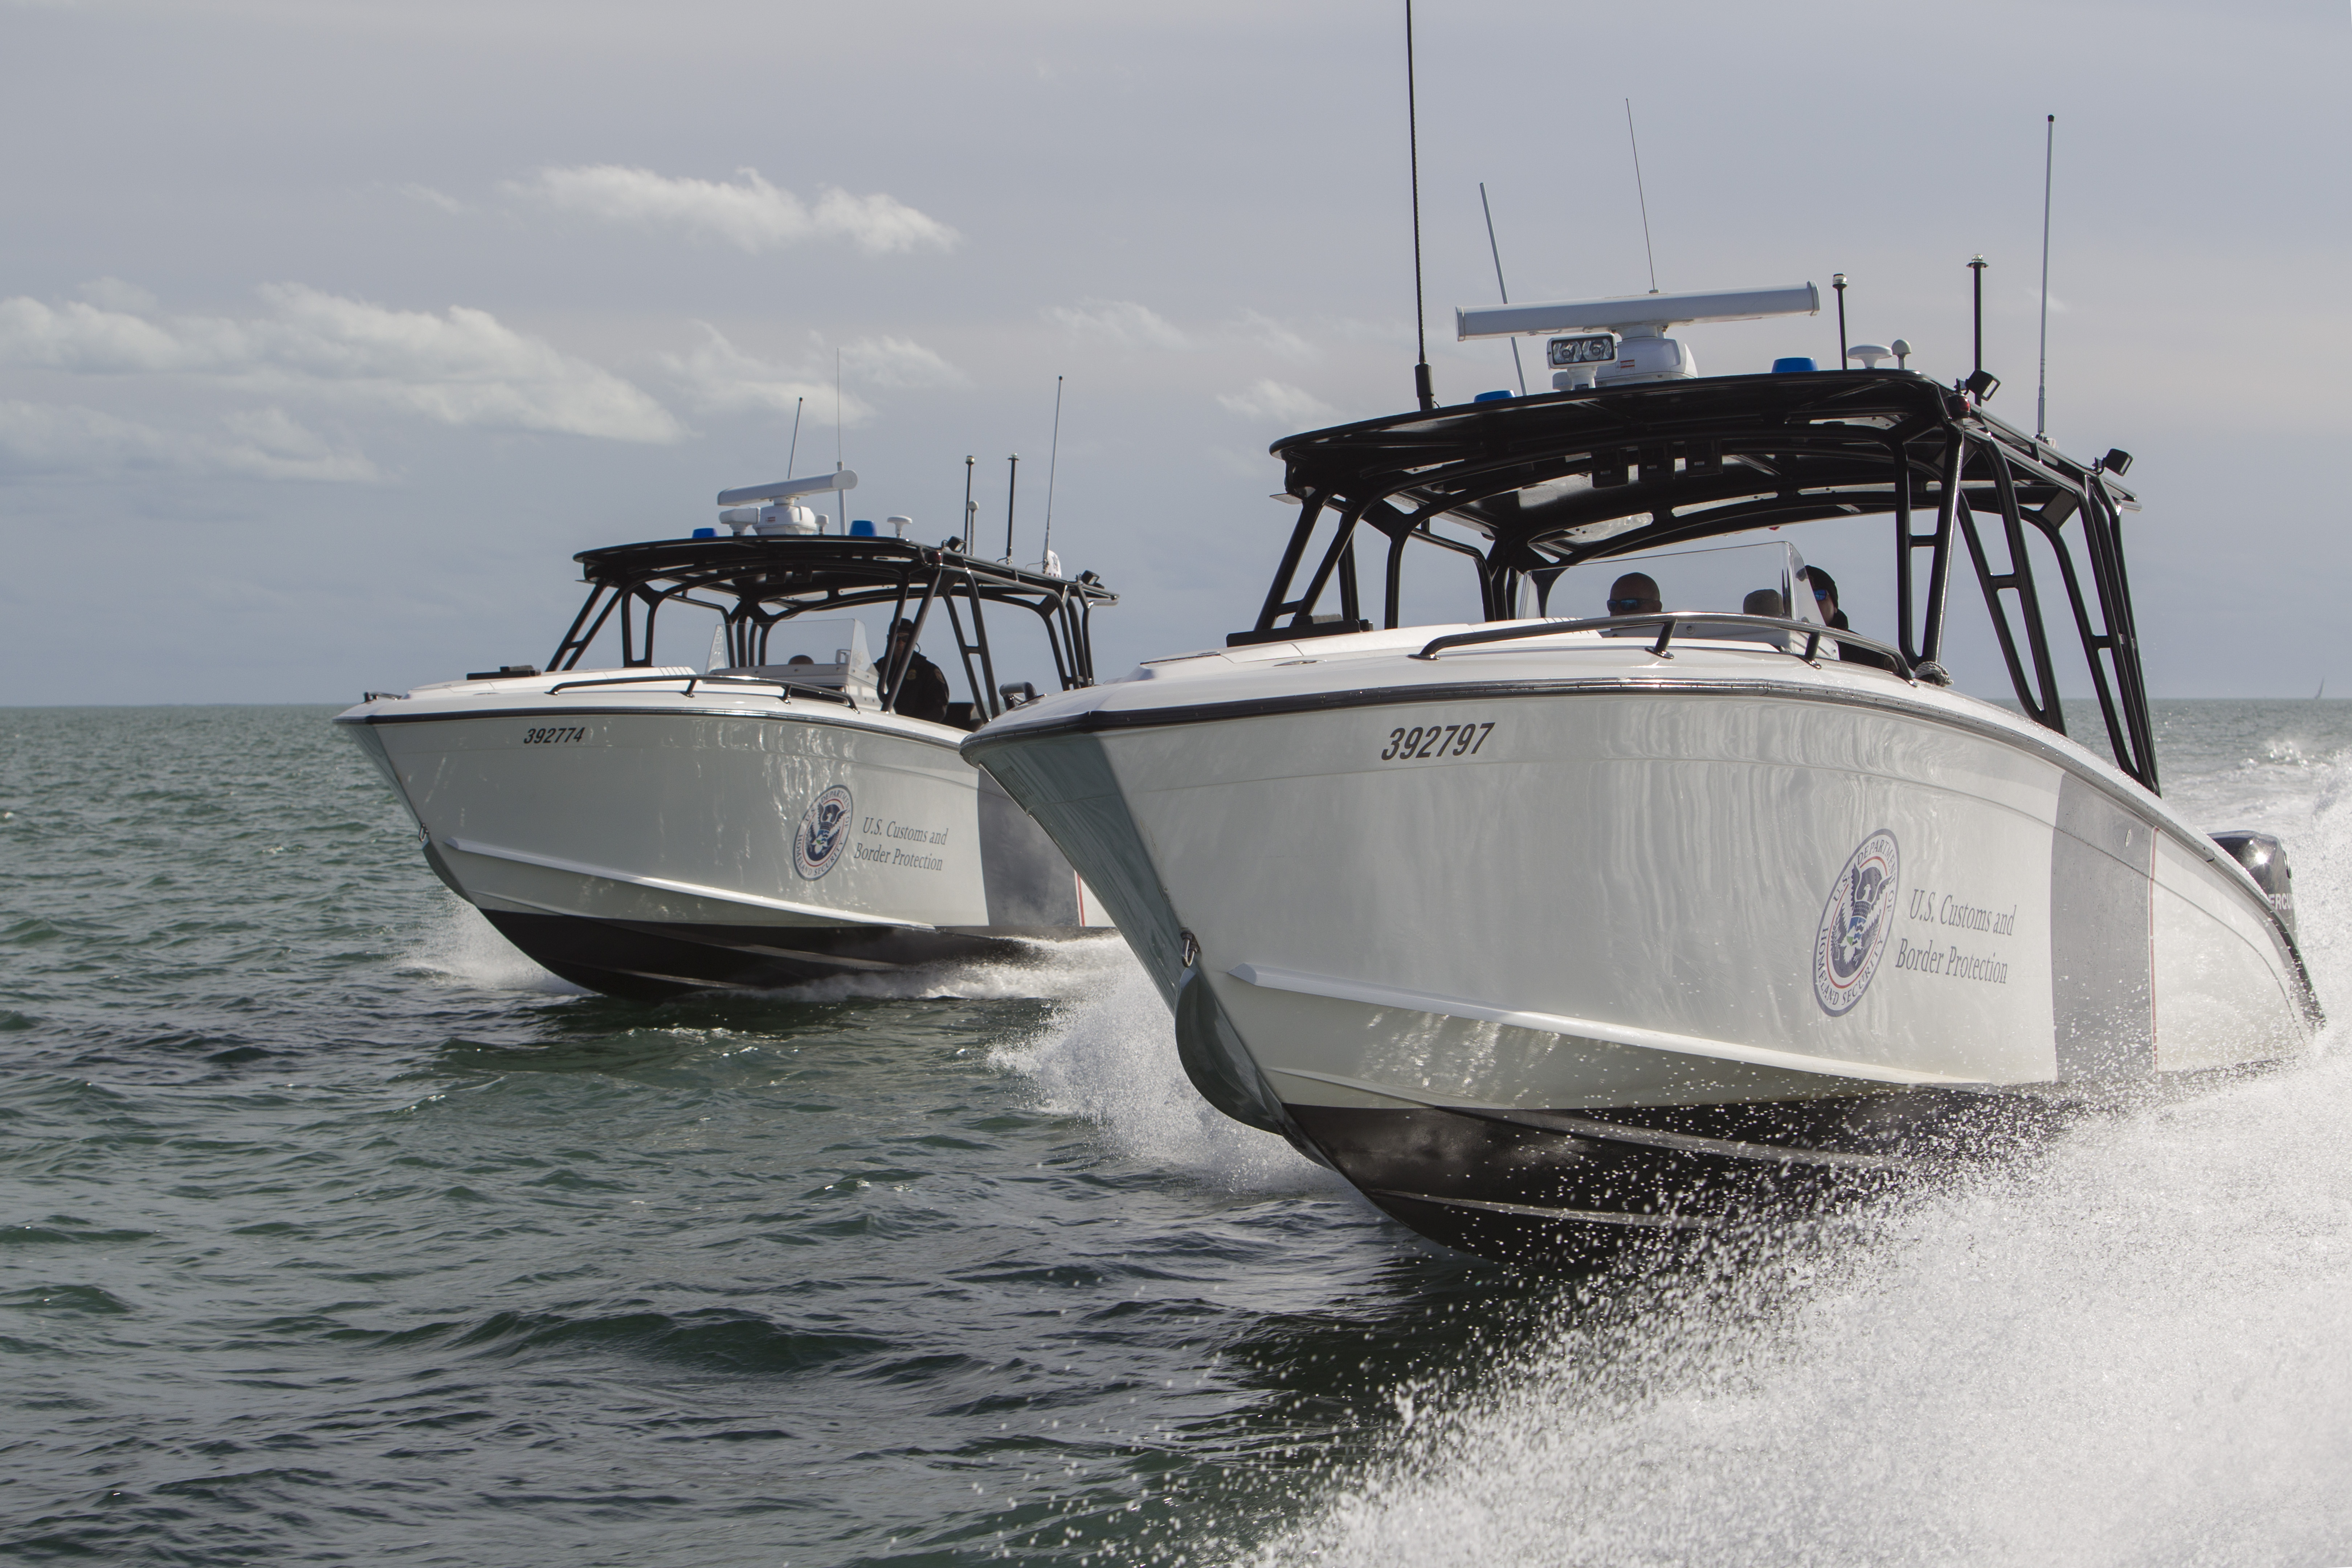 AMO crews patrol Miami waters in the Midnight Express Interceptor vessel to ensure safety in matters of border security